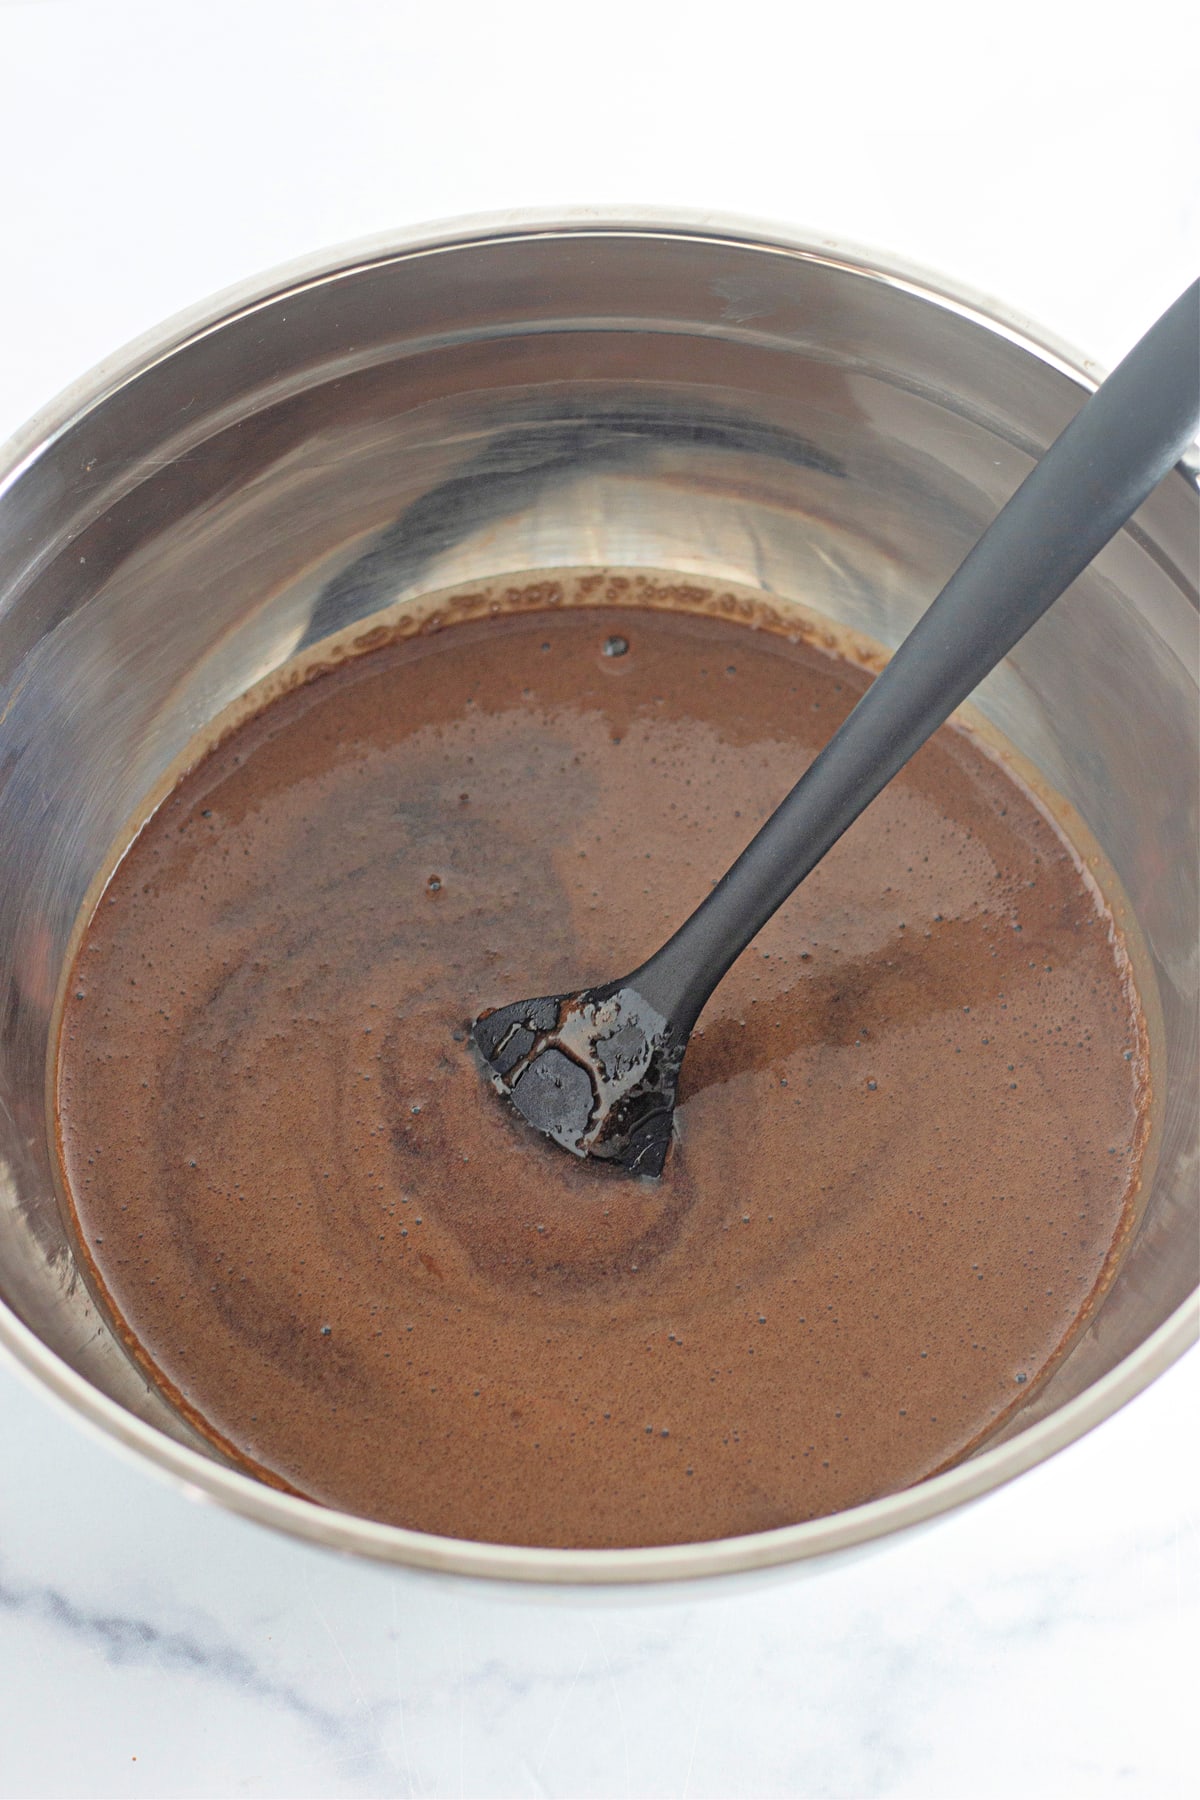 wet ingredients mixed together for chocolate cupcakes